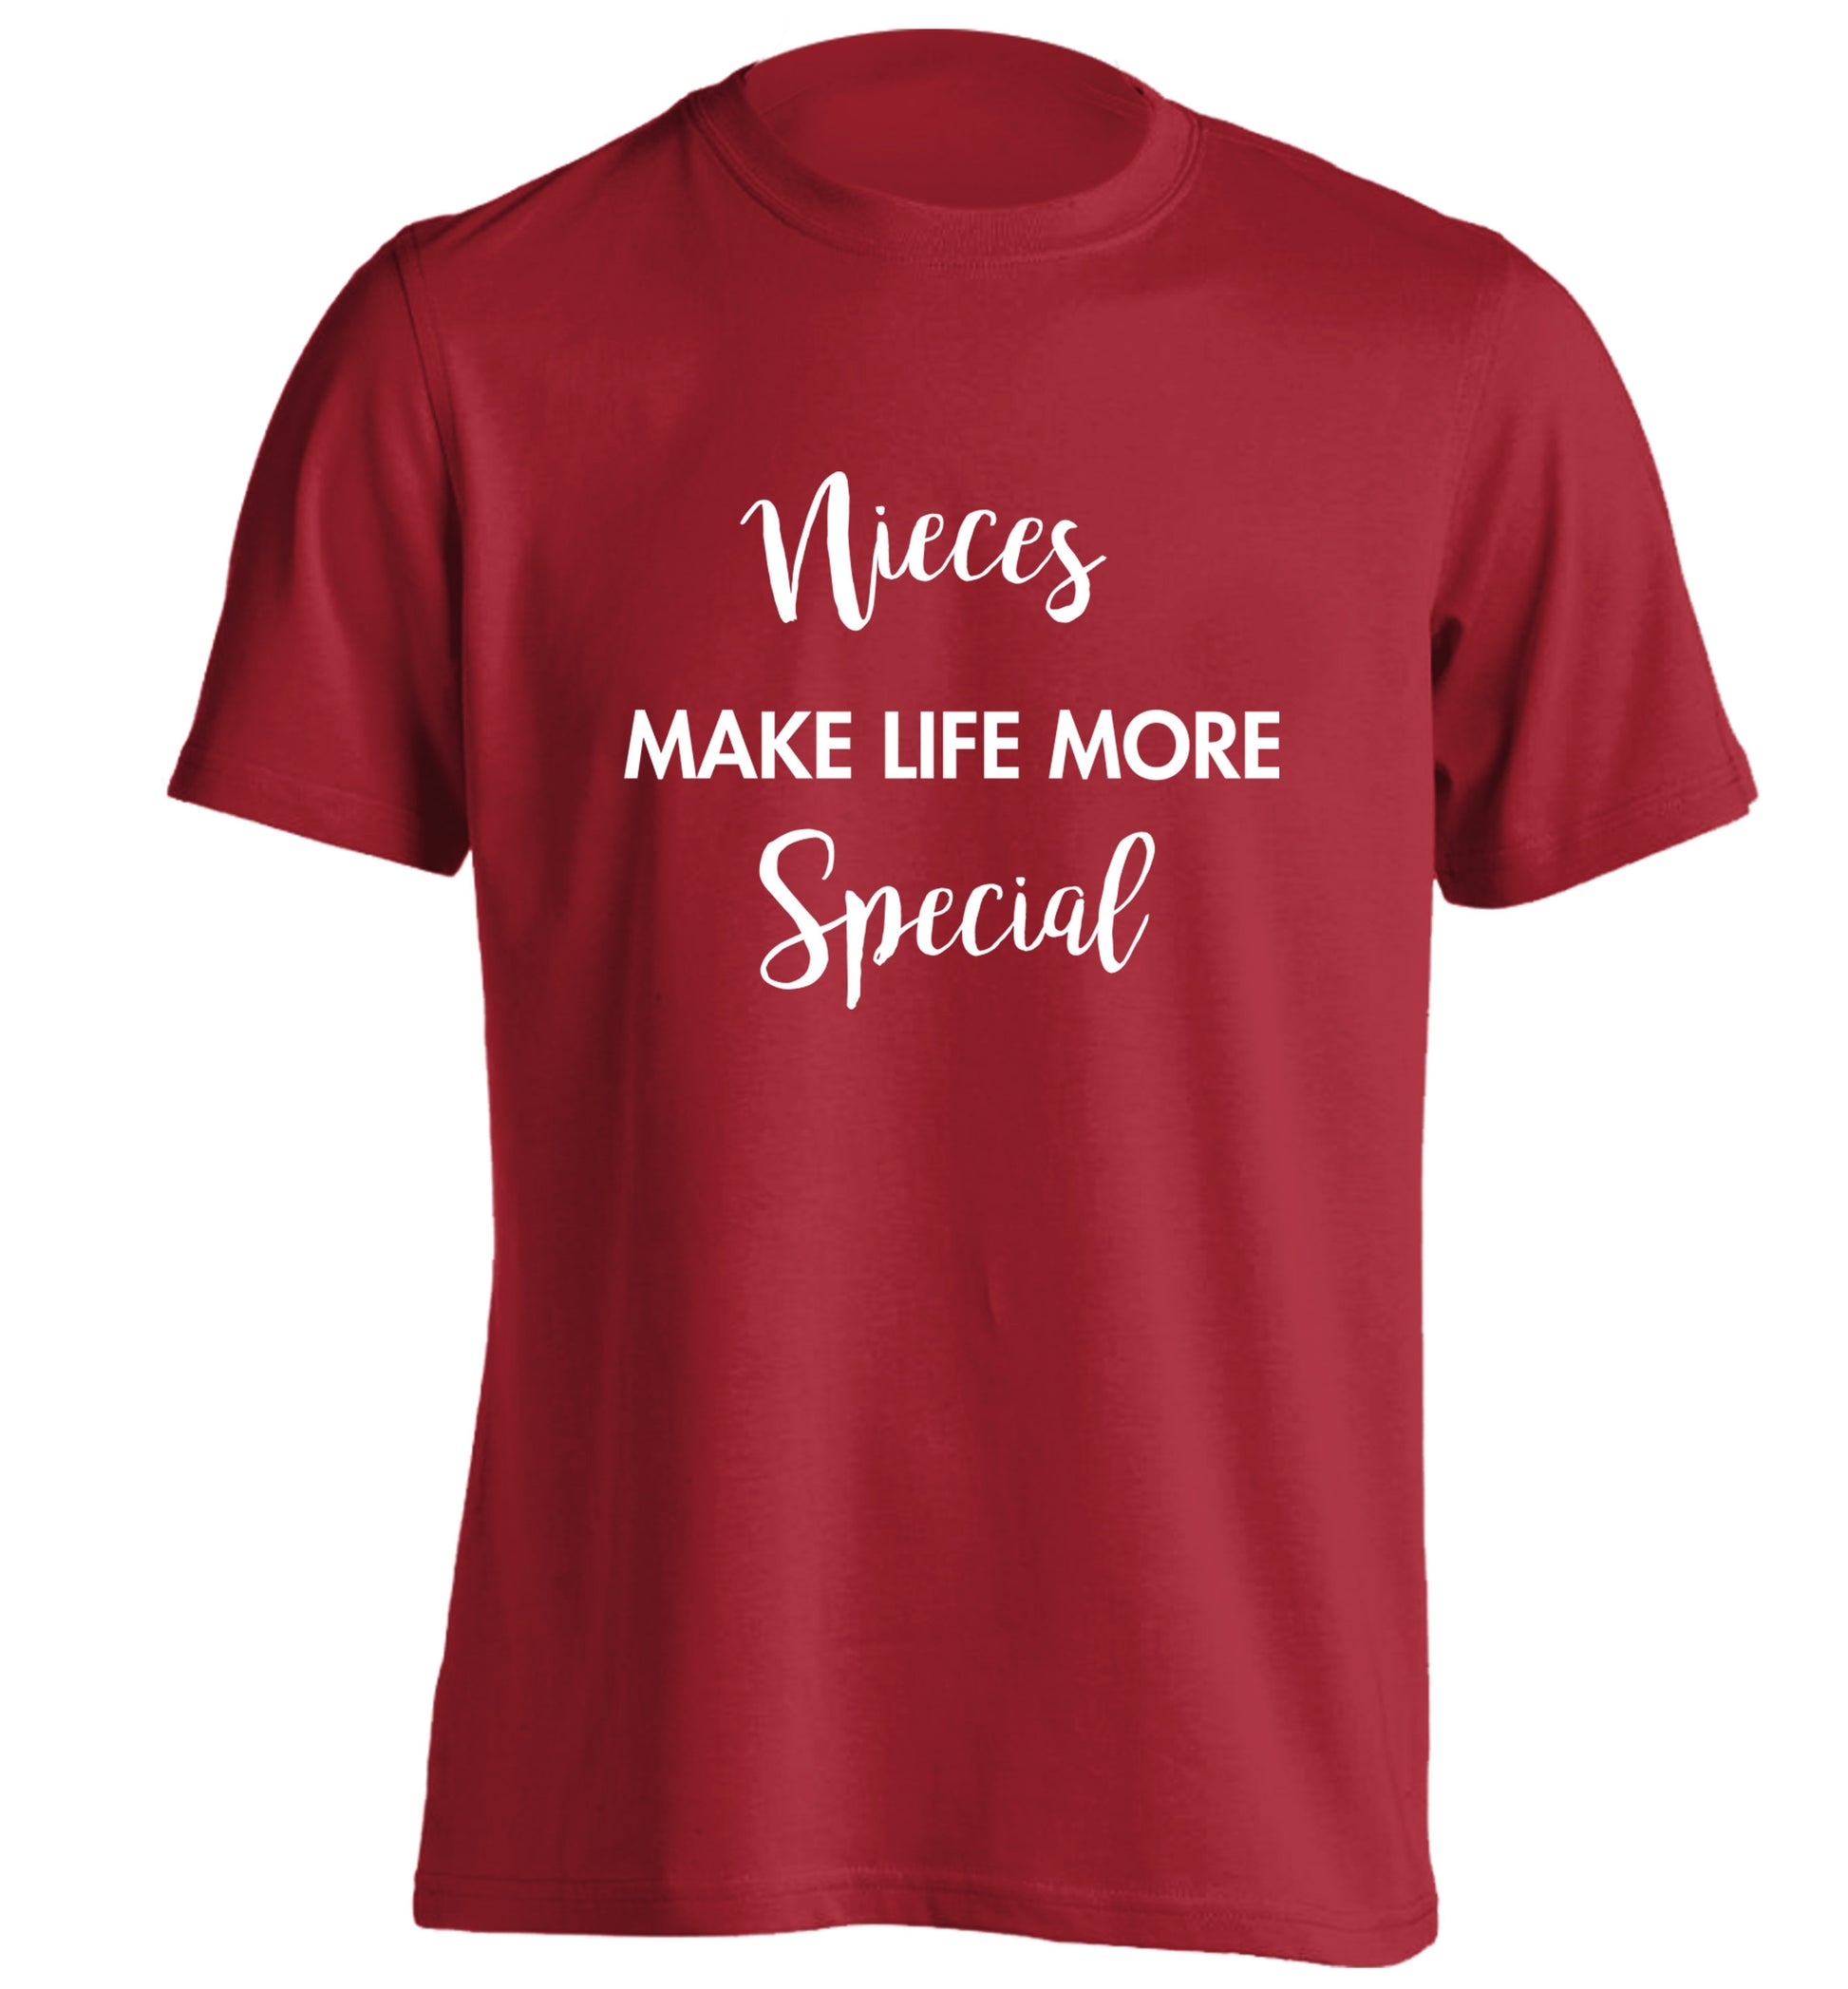 Nieces make life more special adults unisex red Tshirt 2XL